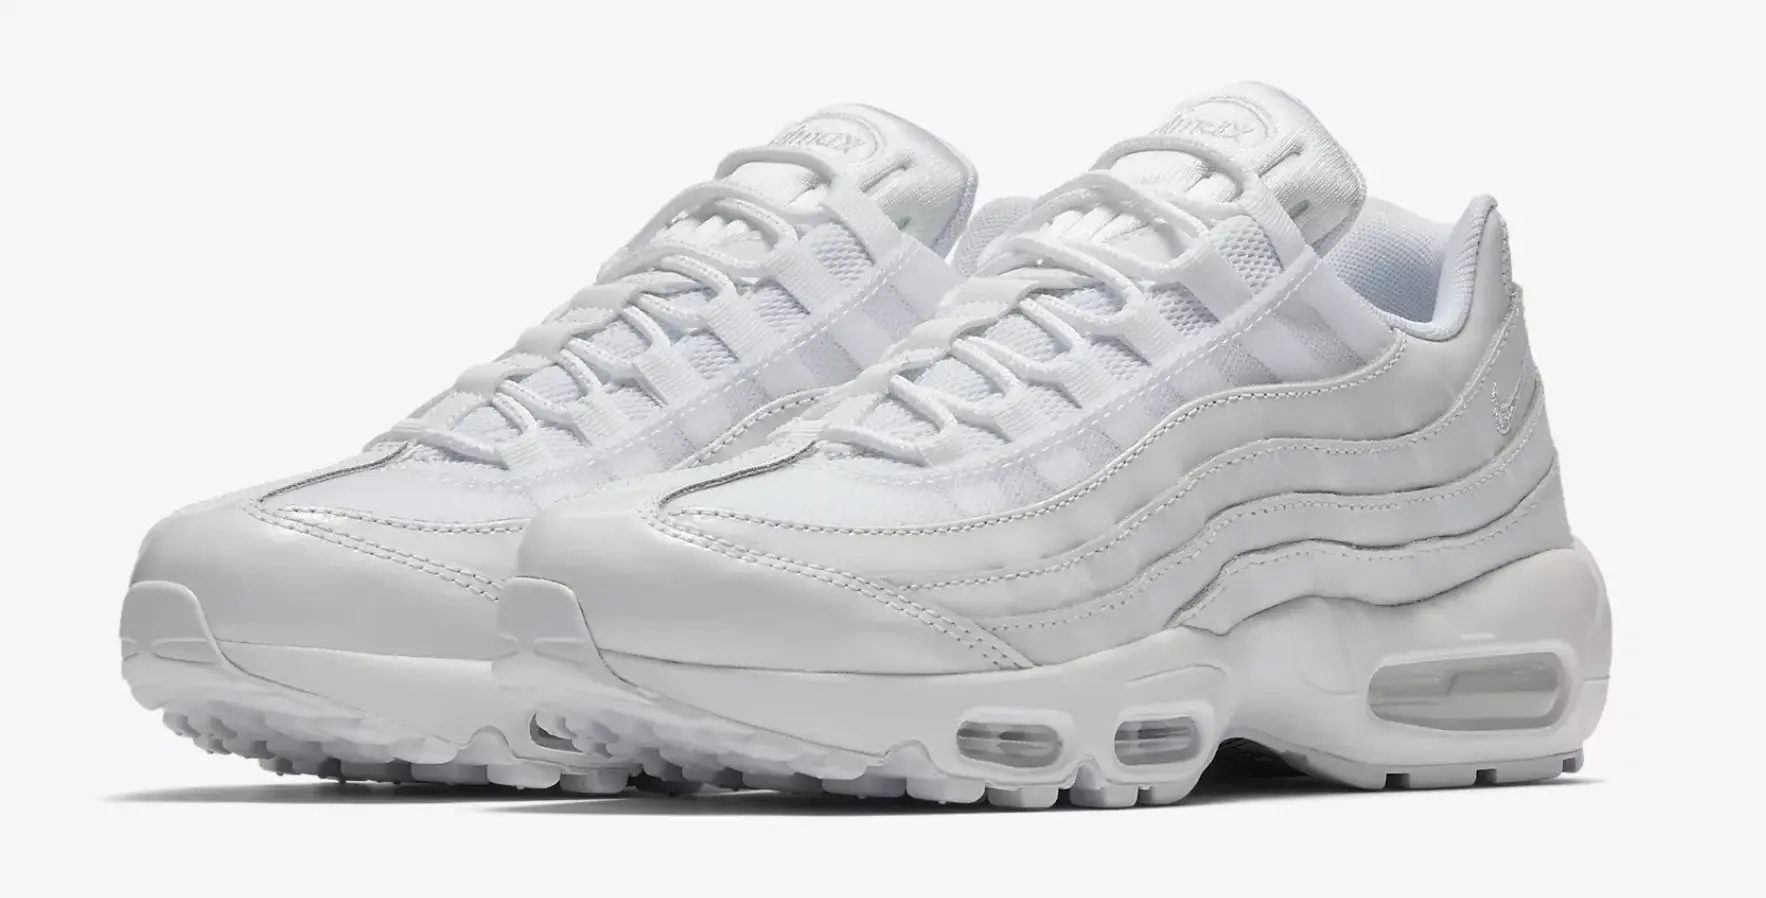 Nike's Air Max 95 Gets Coated In White | The Sole Supplier